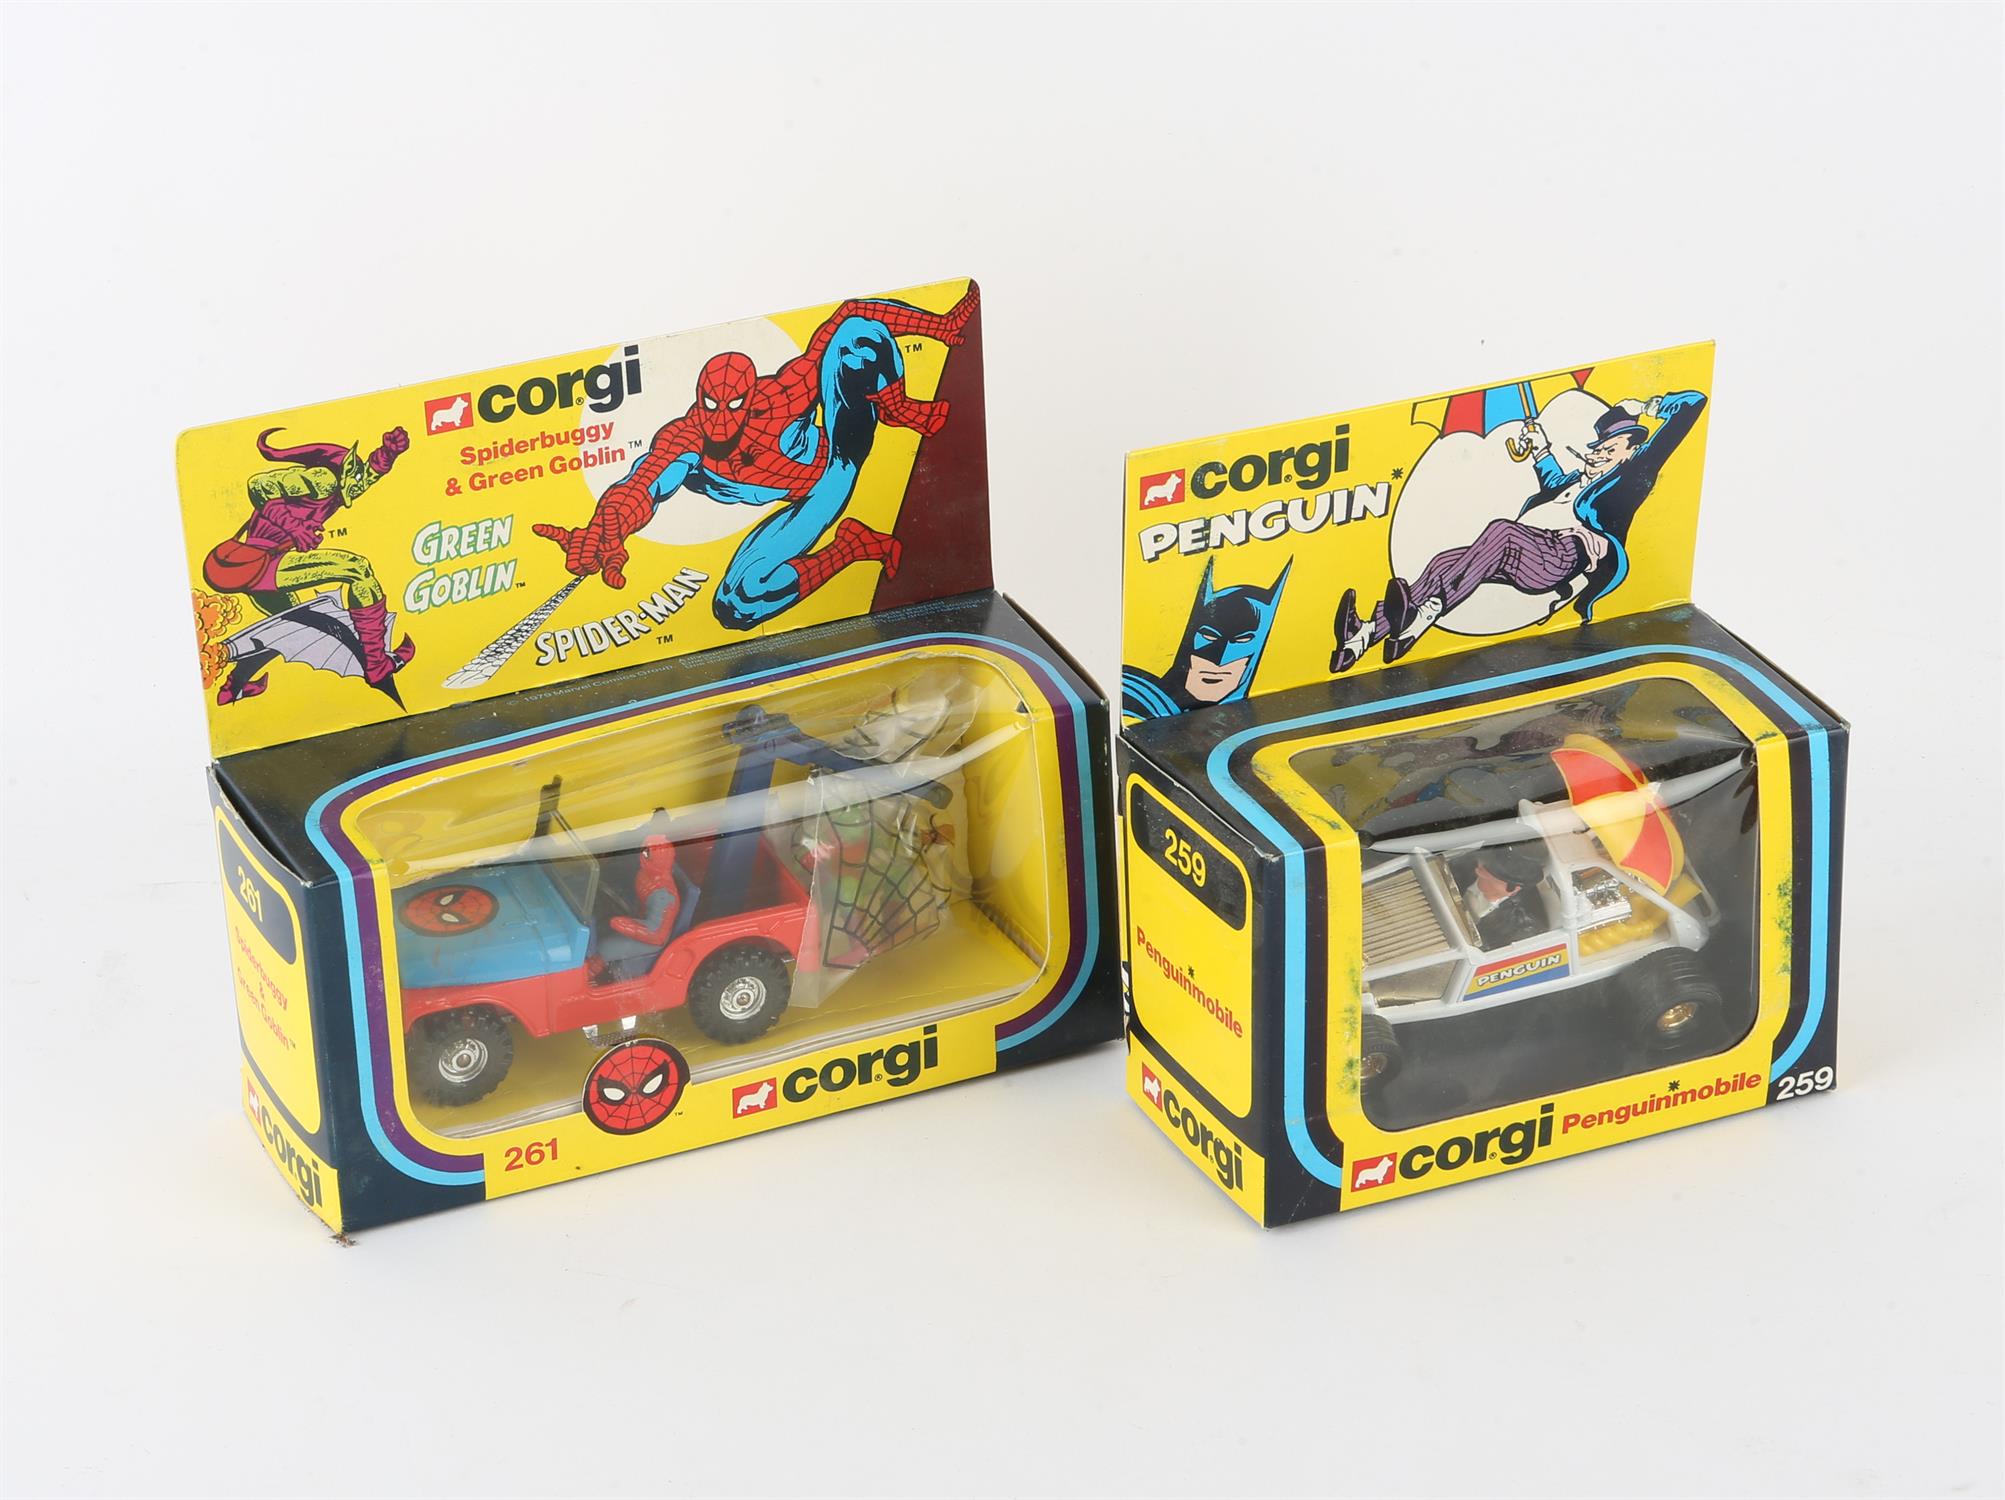 Superheroes - Two novelty toys from Corgi including a Penguinmobile from DC Comics